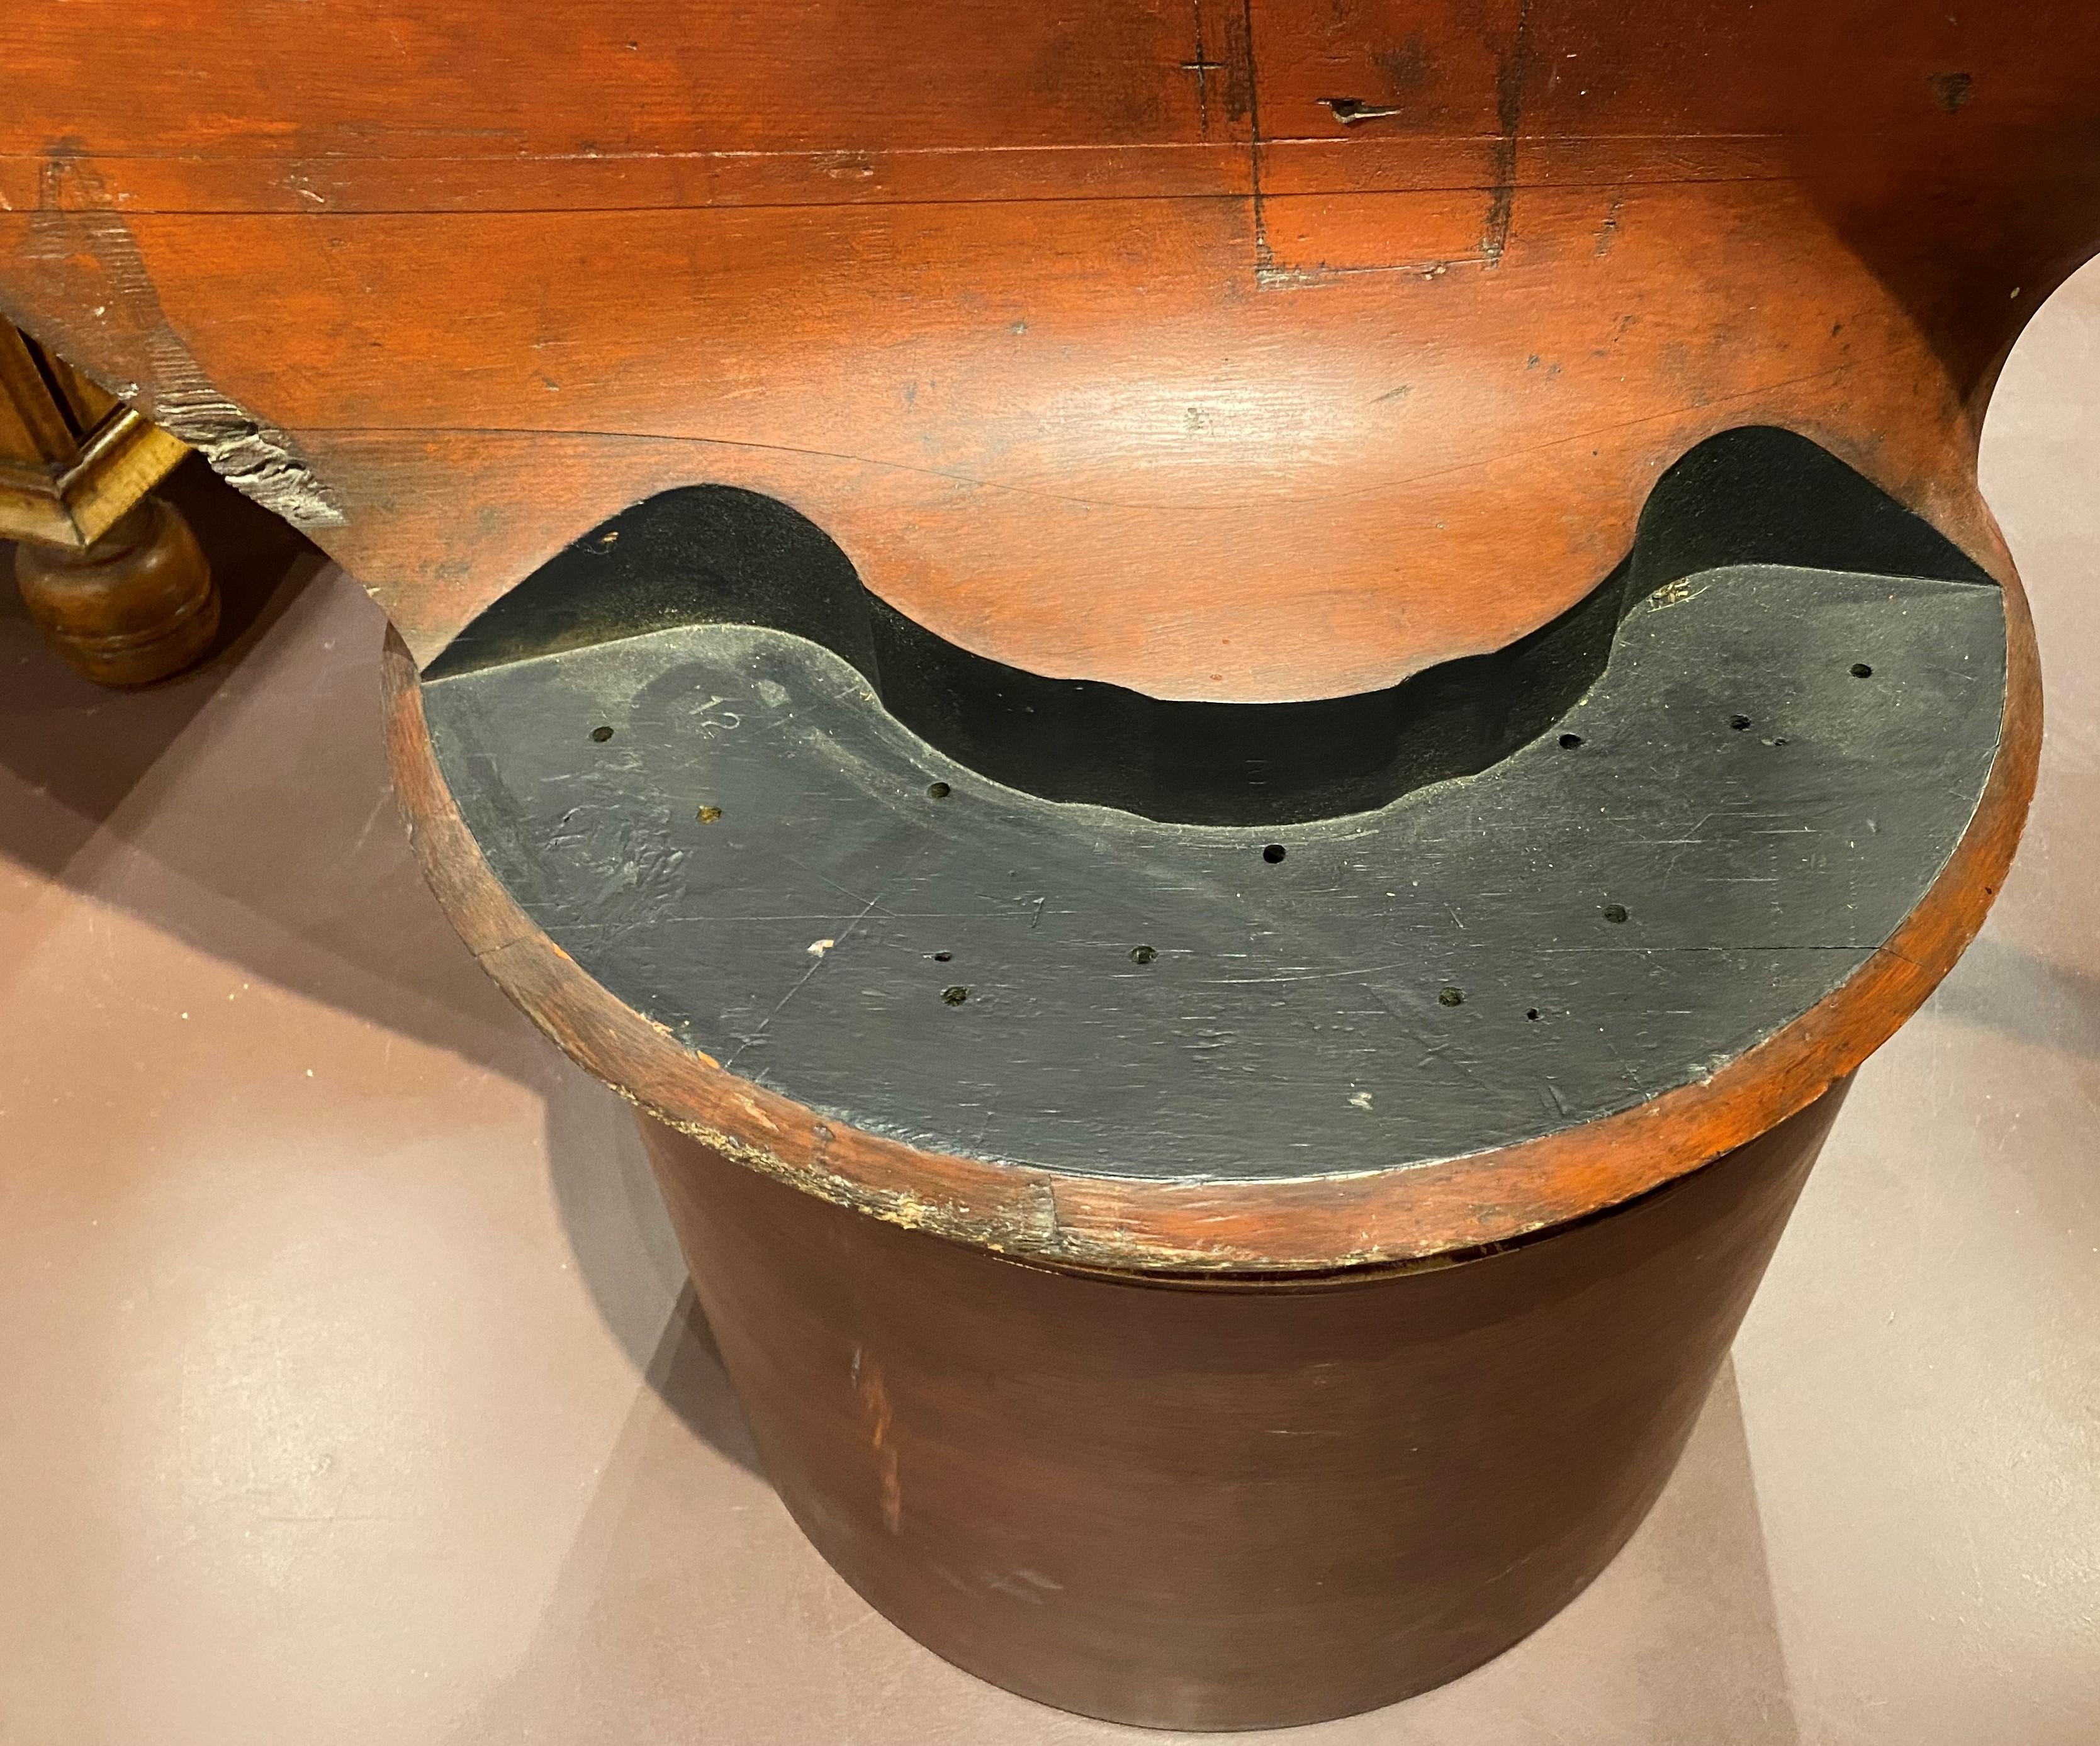 Large Wooden Ship’s Propeller Blade Foundry Casting Mold on Plinth In Good Condition For Sale In Milford, NH